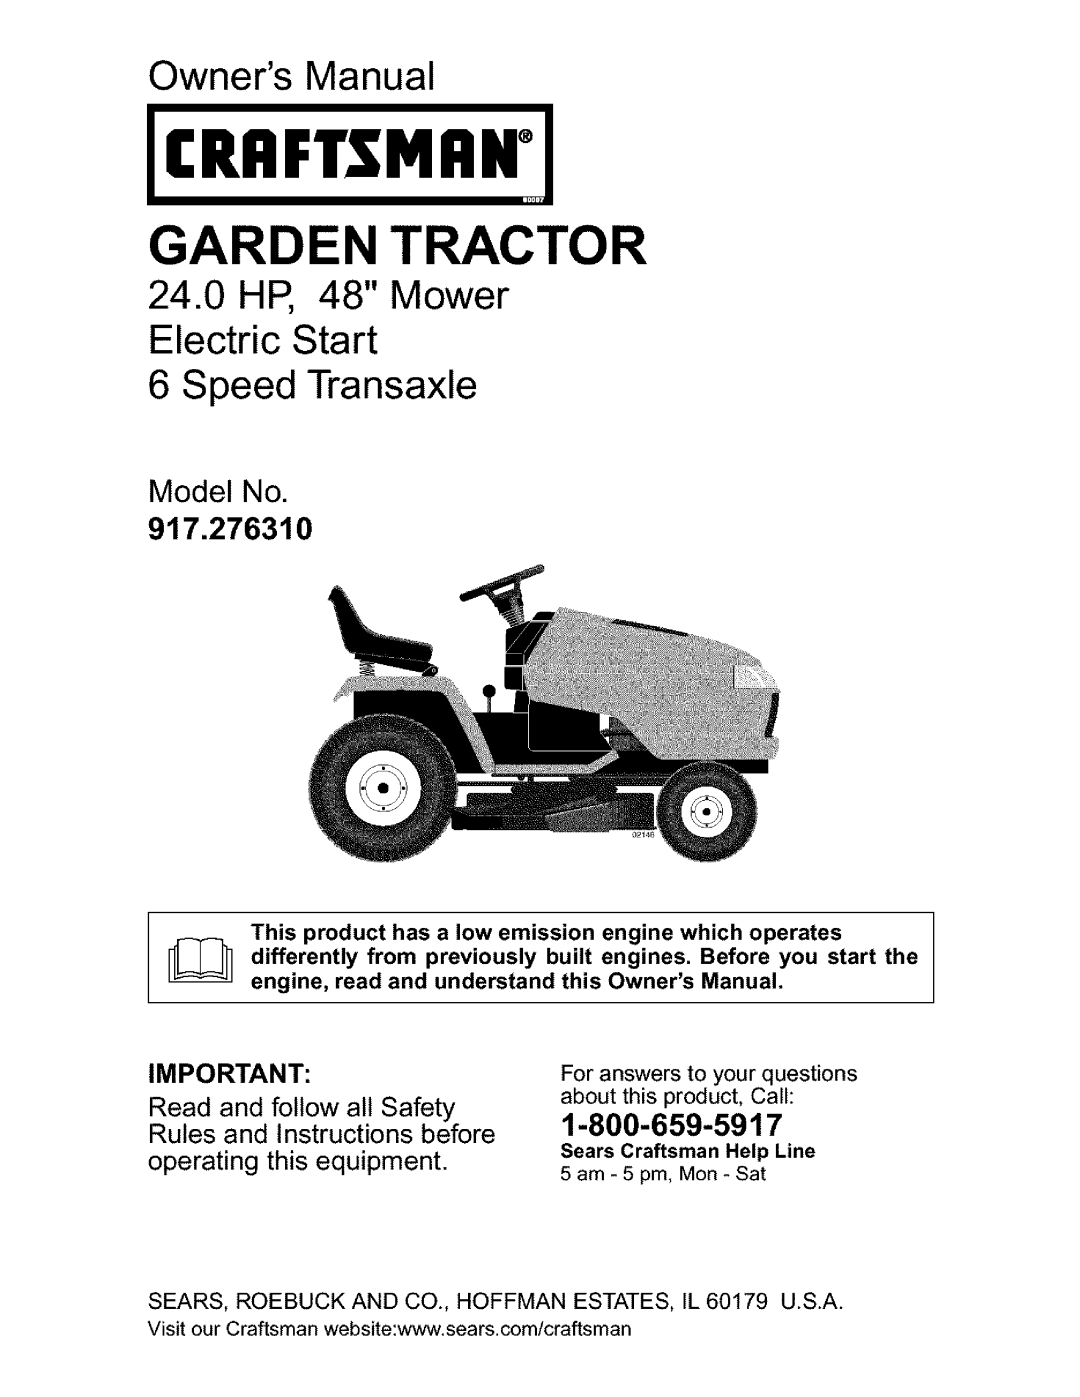 Craftsman 917.27631 owner manual Owners Manual, 24.0HP, 48 Mower, Speed Transaxle, Model No, operating this equipment 